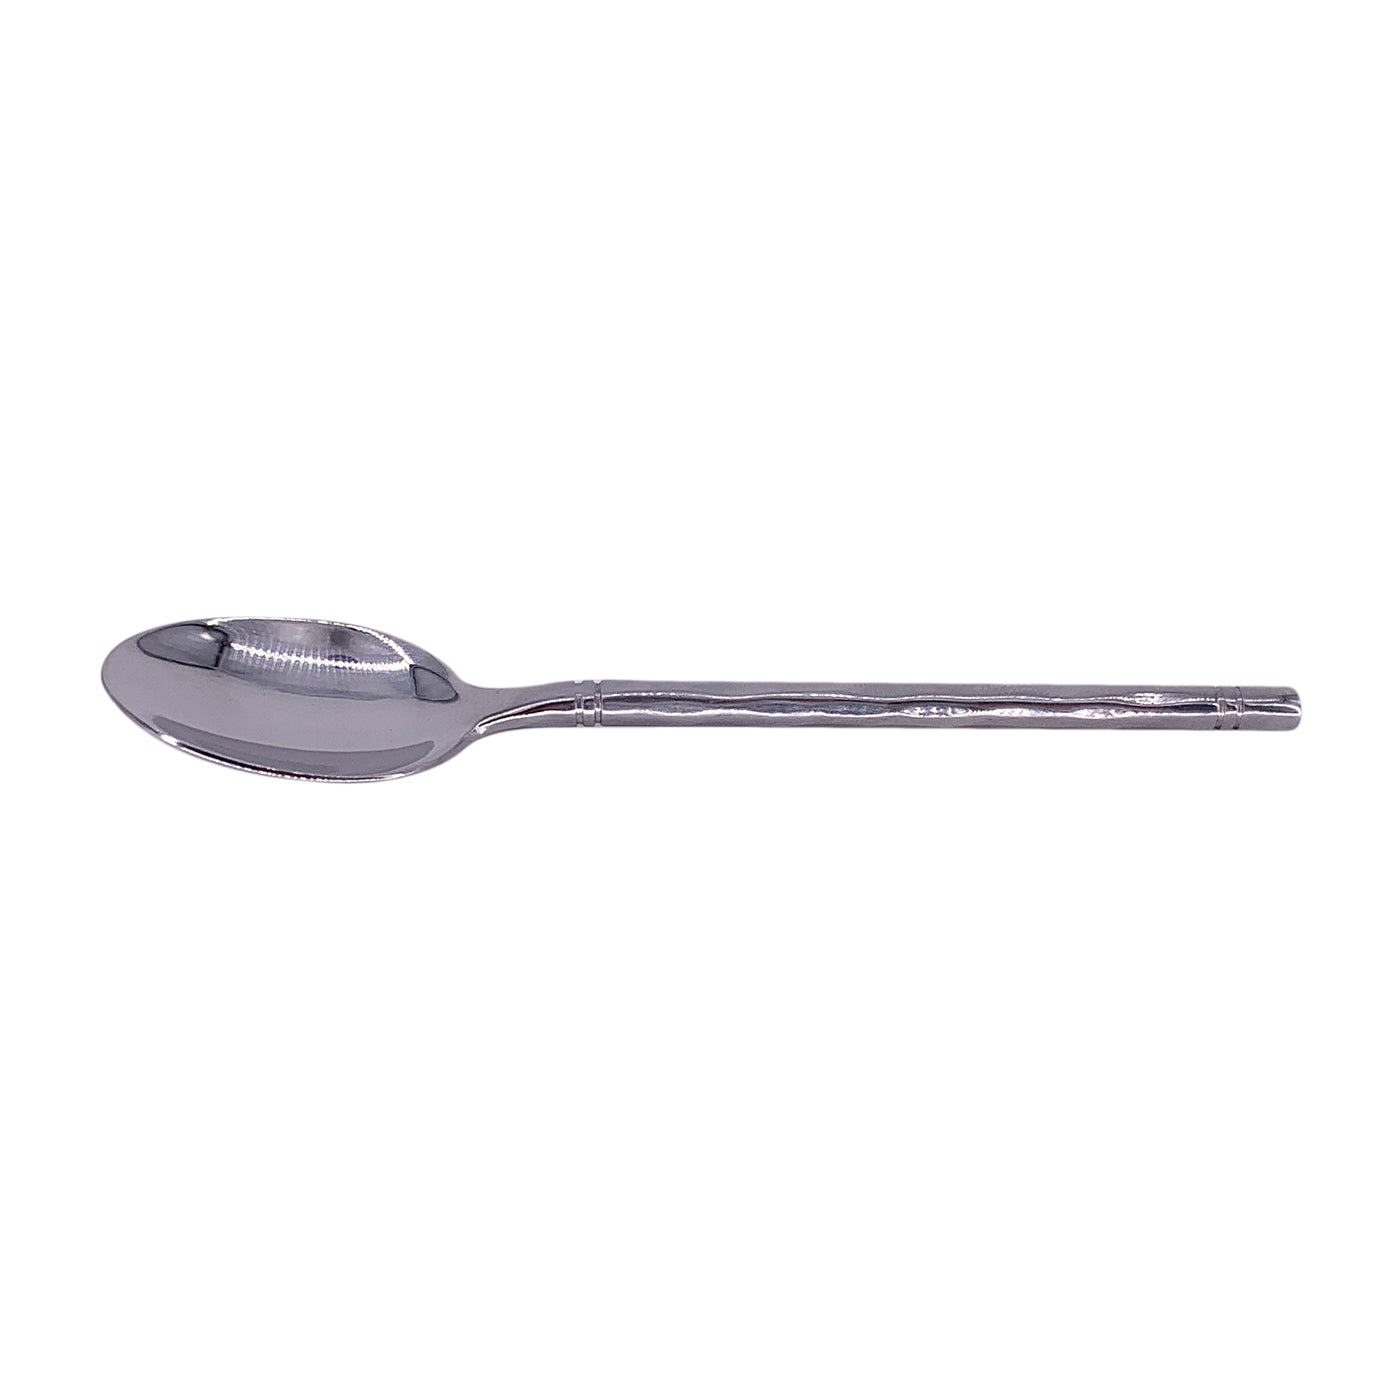 Refined stainless steel spoon